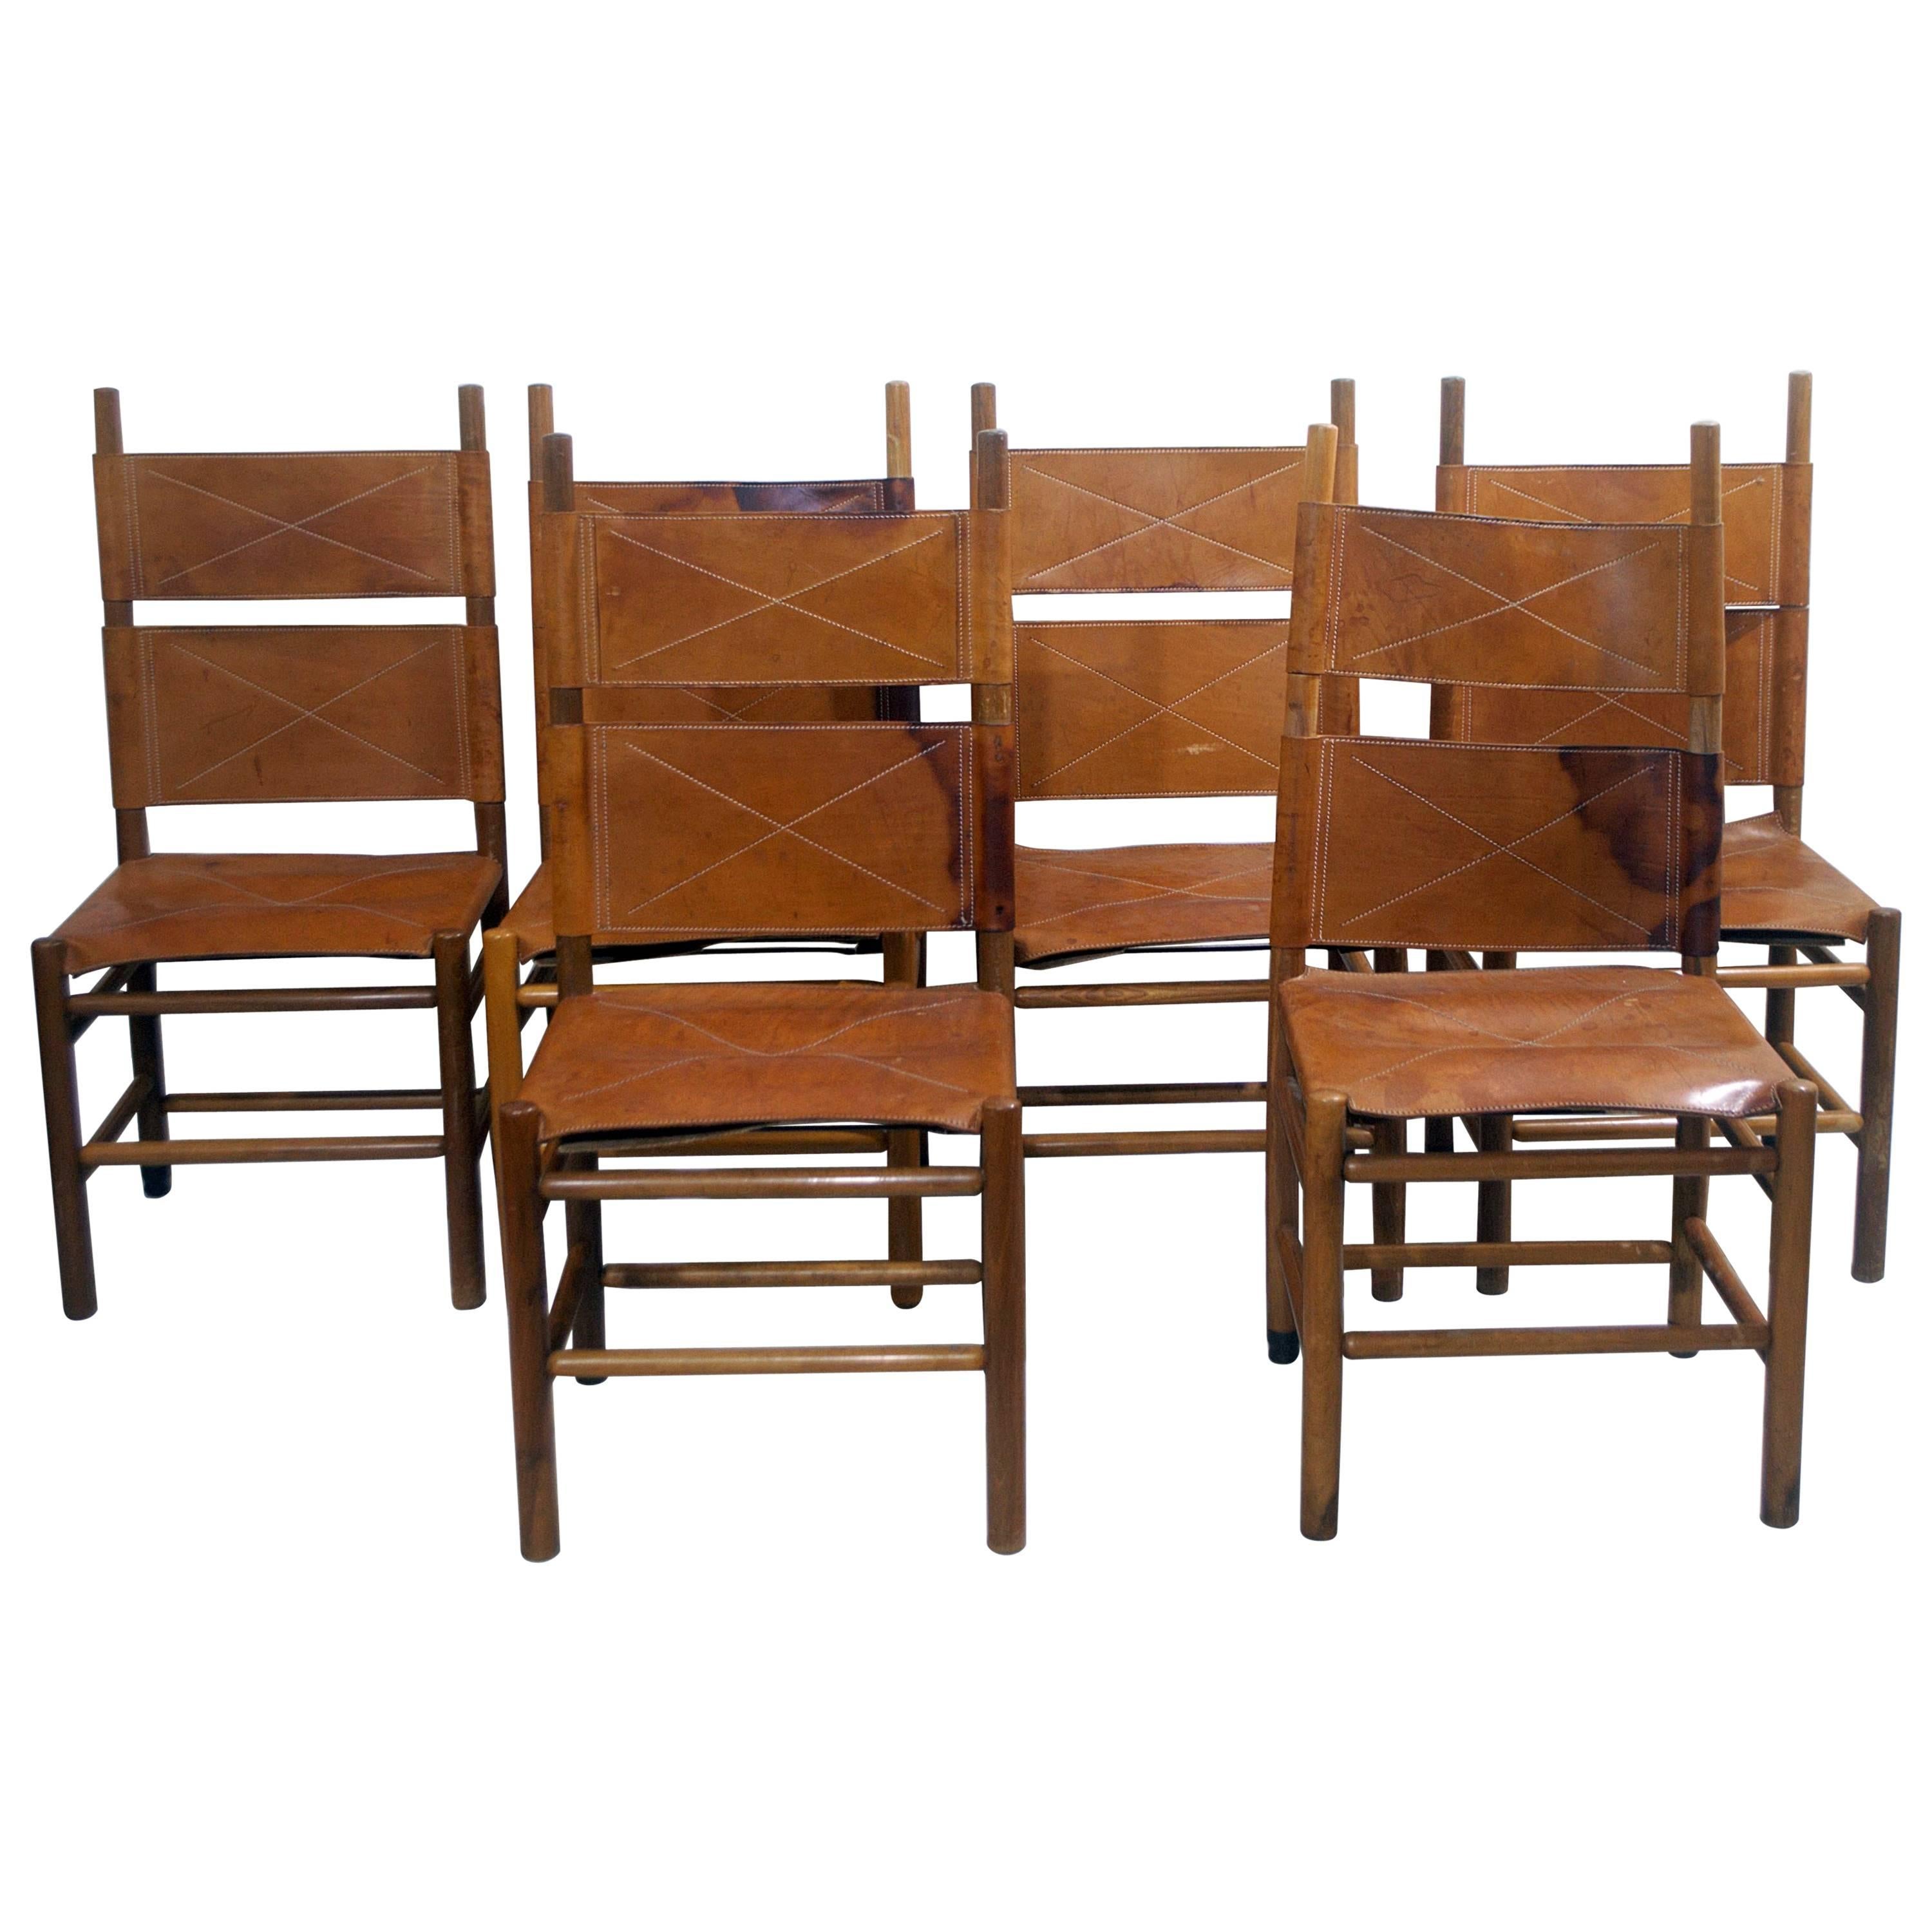 Set of Six Walnut and Cognac Leather Chairs by Carlo Scarpa for Bernini, 1977